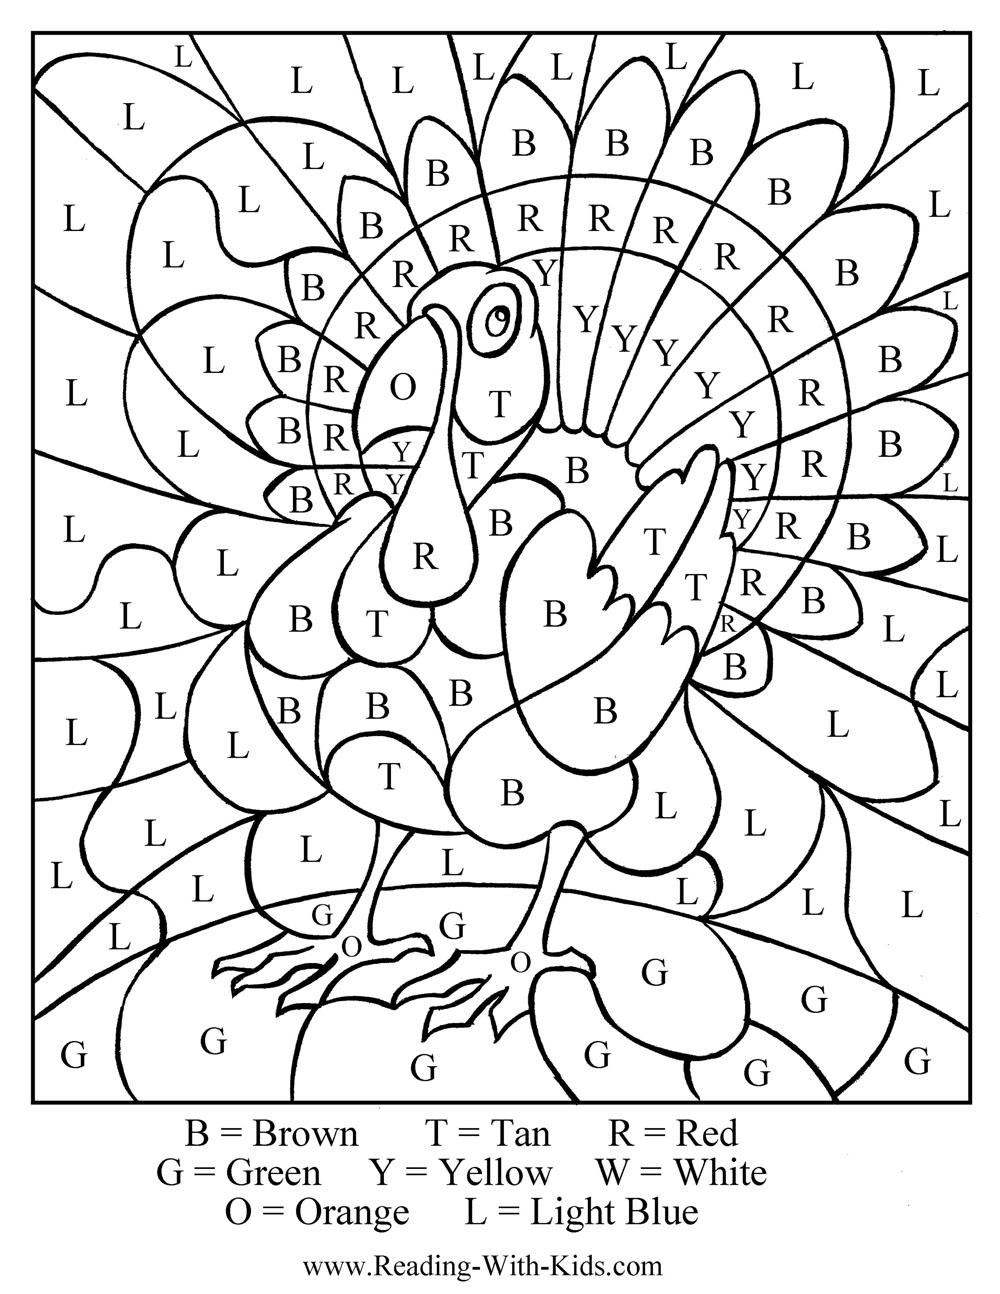 Coloring Pages ~ Thanksgiving Coloring For Kids Turkey Color - Free Printable Thanksgiving Coloring Placemats